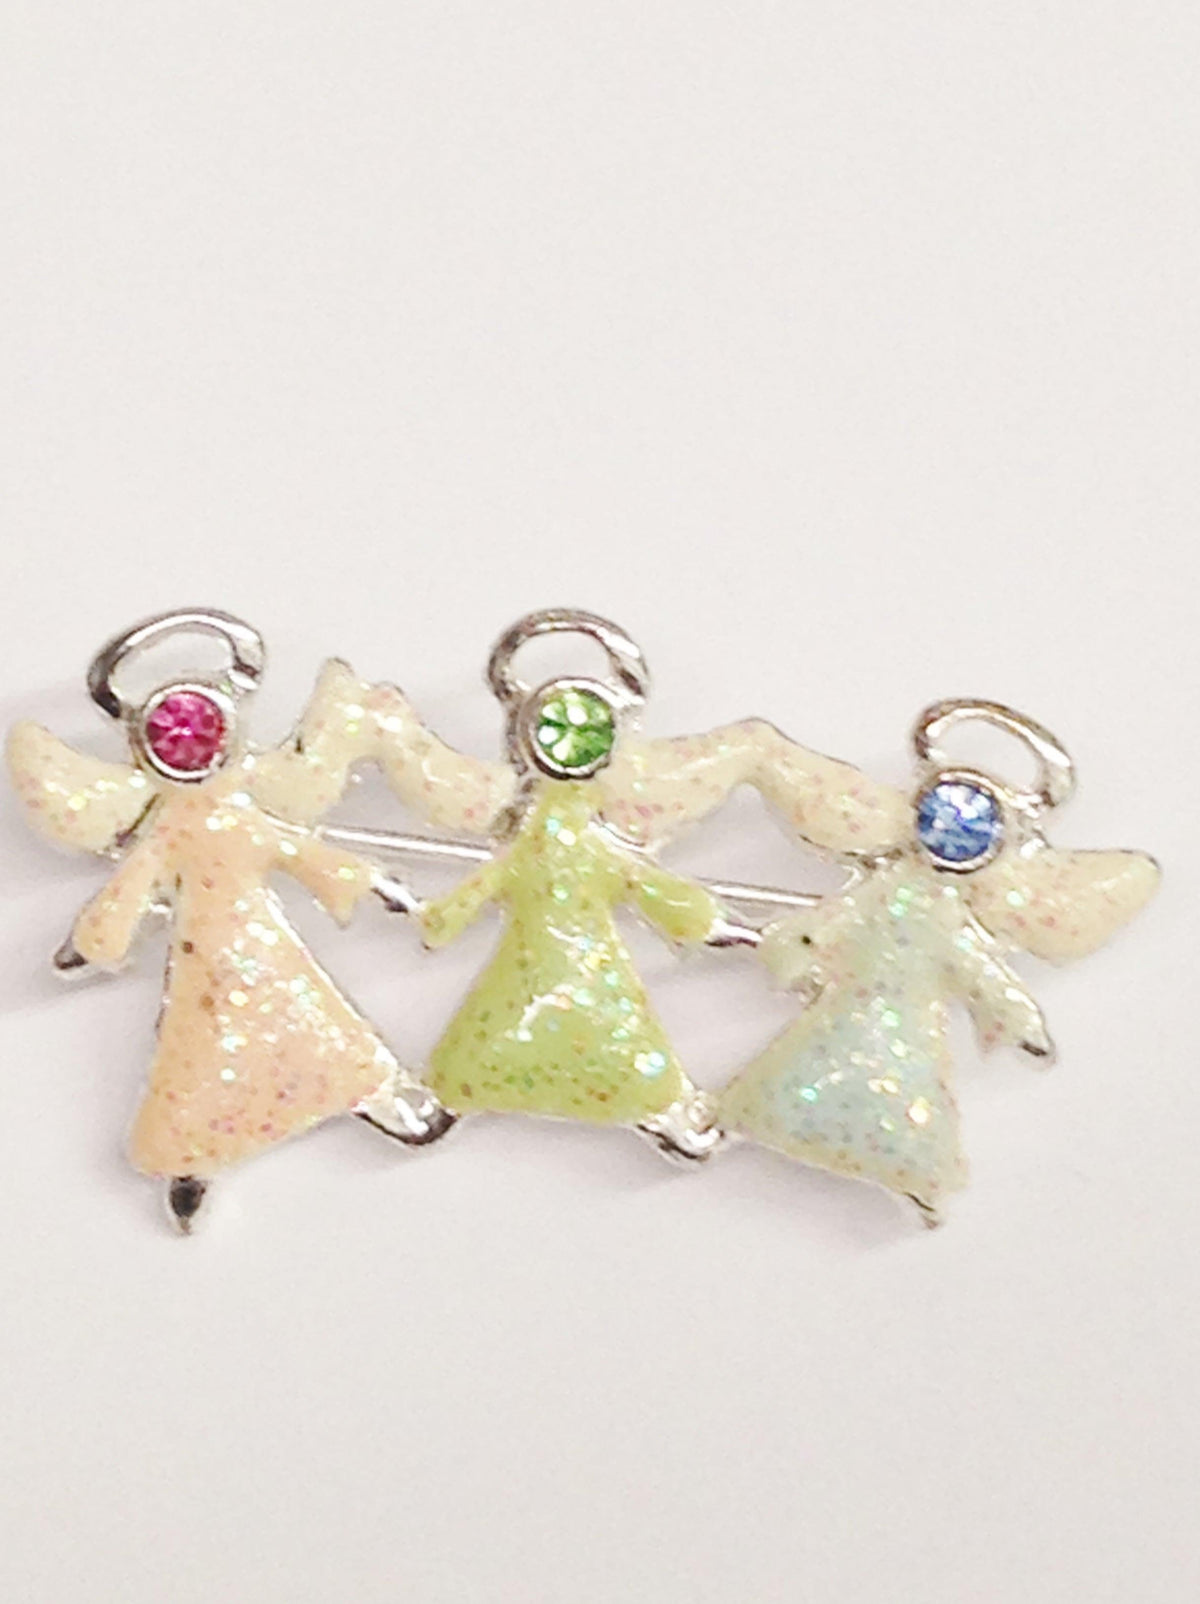 Three Little Angels Silver Tone Brooch W/ Rhinestones - Hers and His Treasures